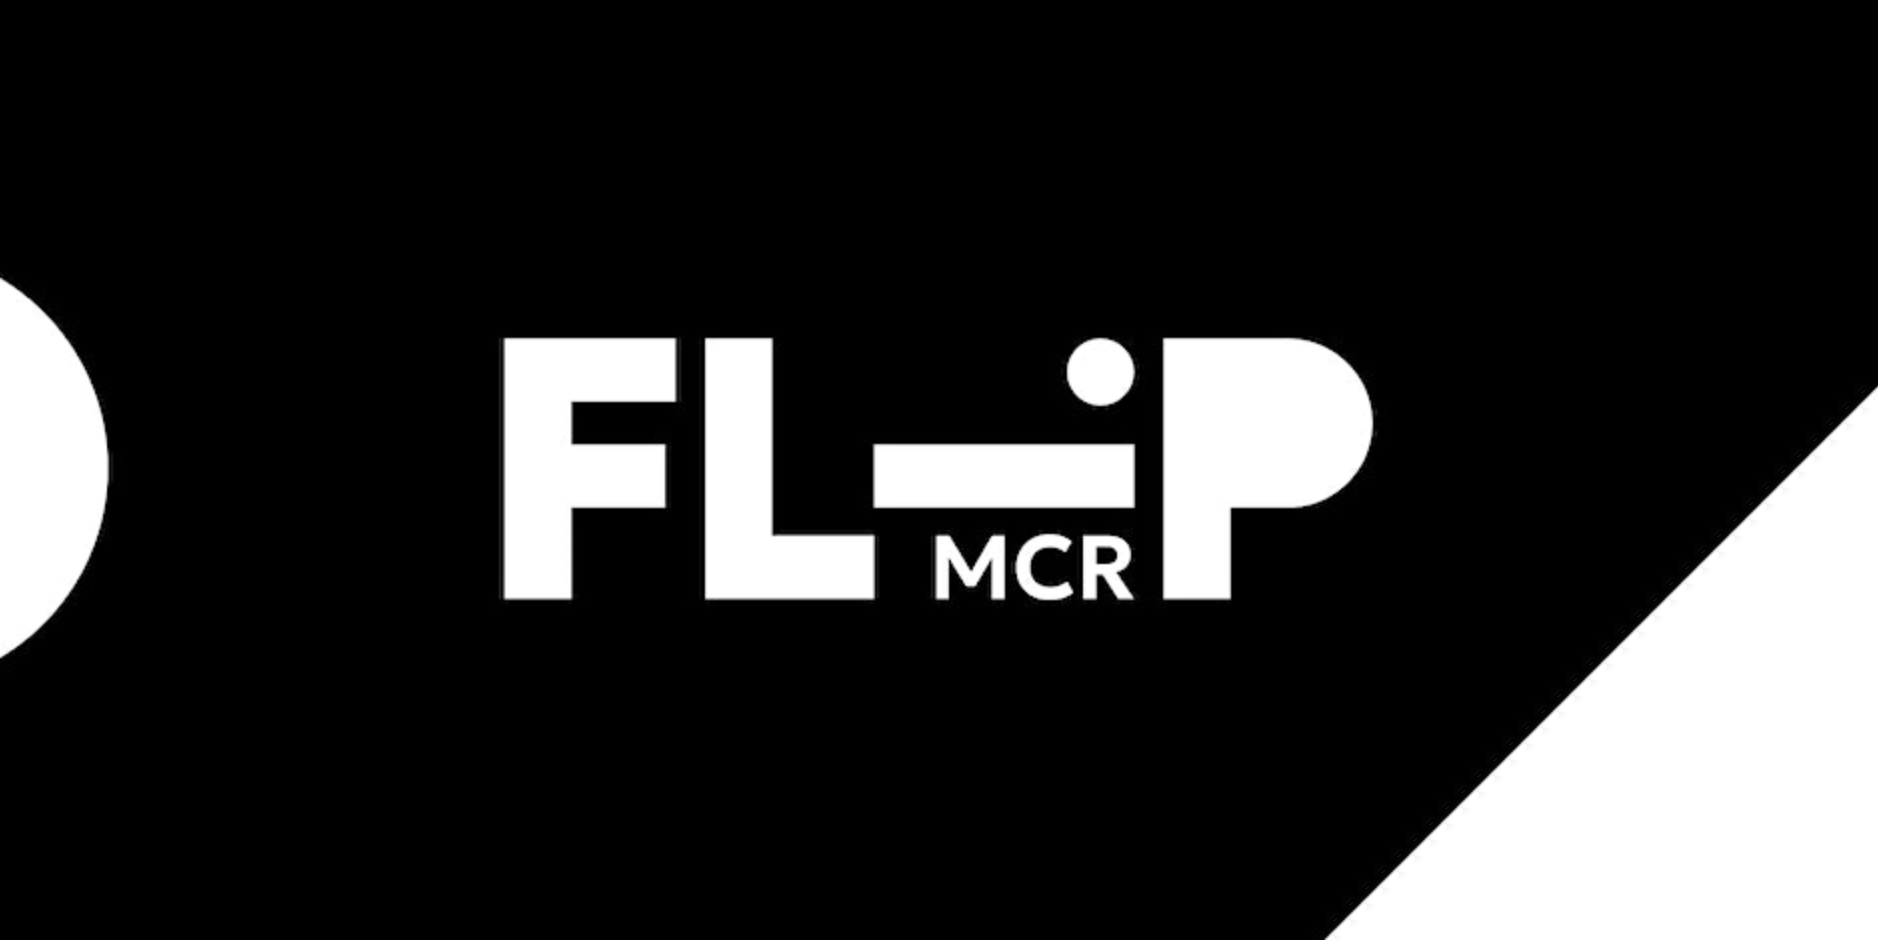 Founders and Investors to unite at Flip MCR, time running out to secure your place